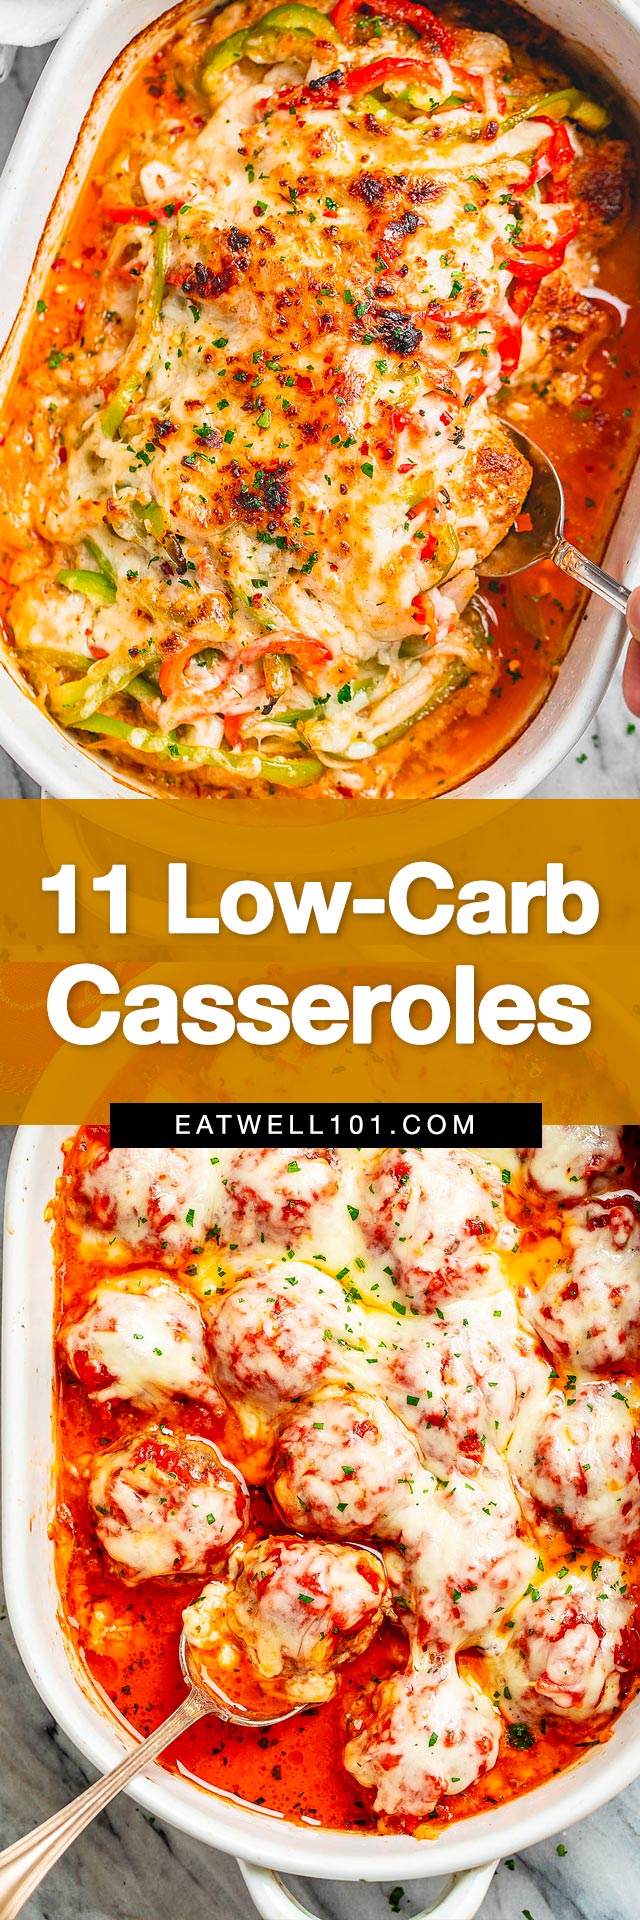 11 Healthy Low-Carb Casseroles - #low-carb #casserole #recipes #eatwell101 - Feel good about serving these healthy low-carb casseroles up and keep following your lower-carb diet. Enjoy!